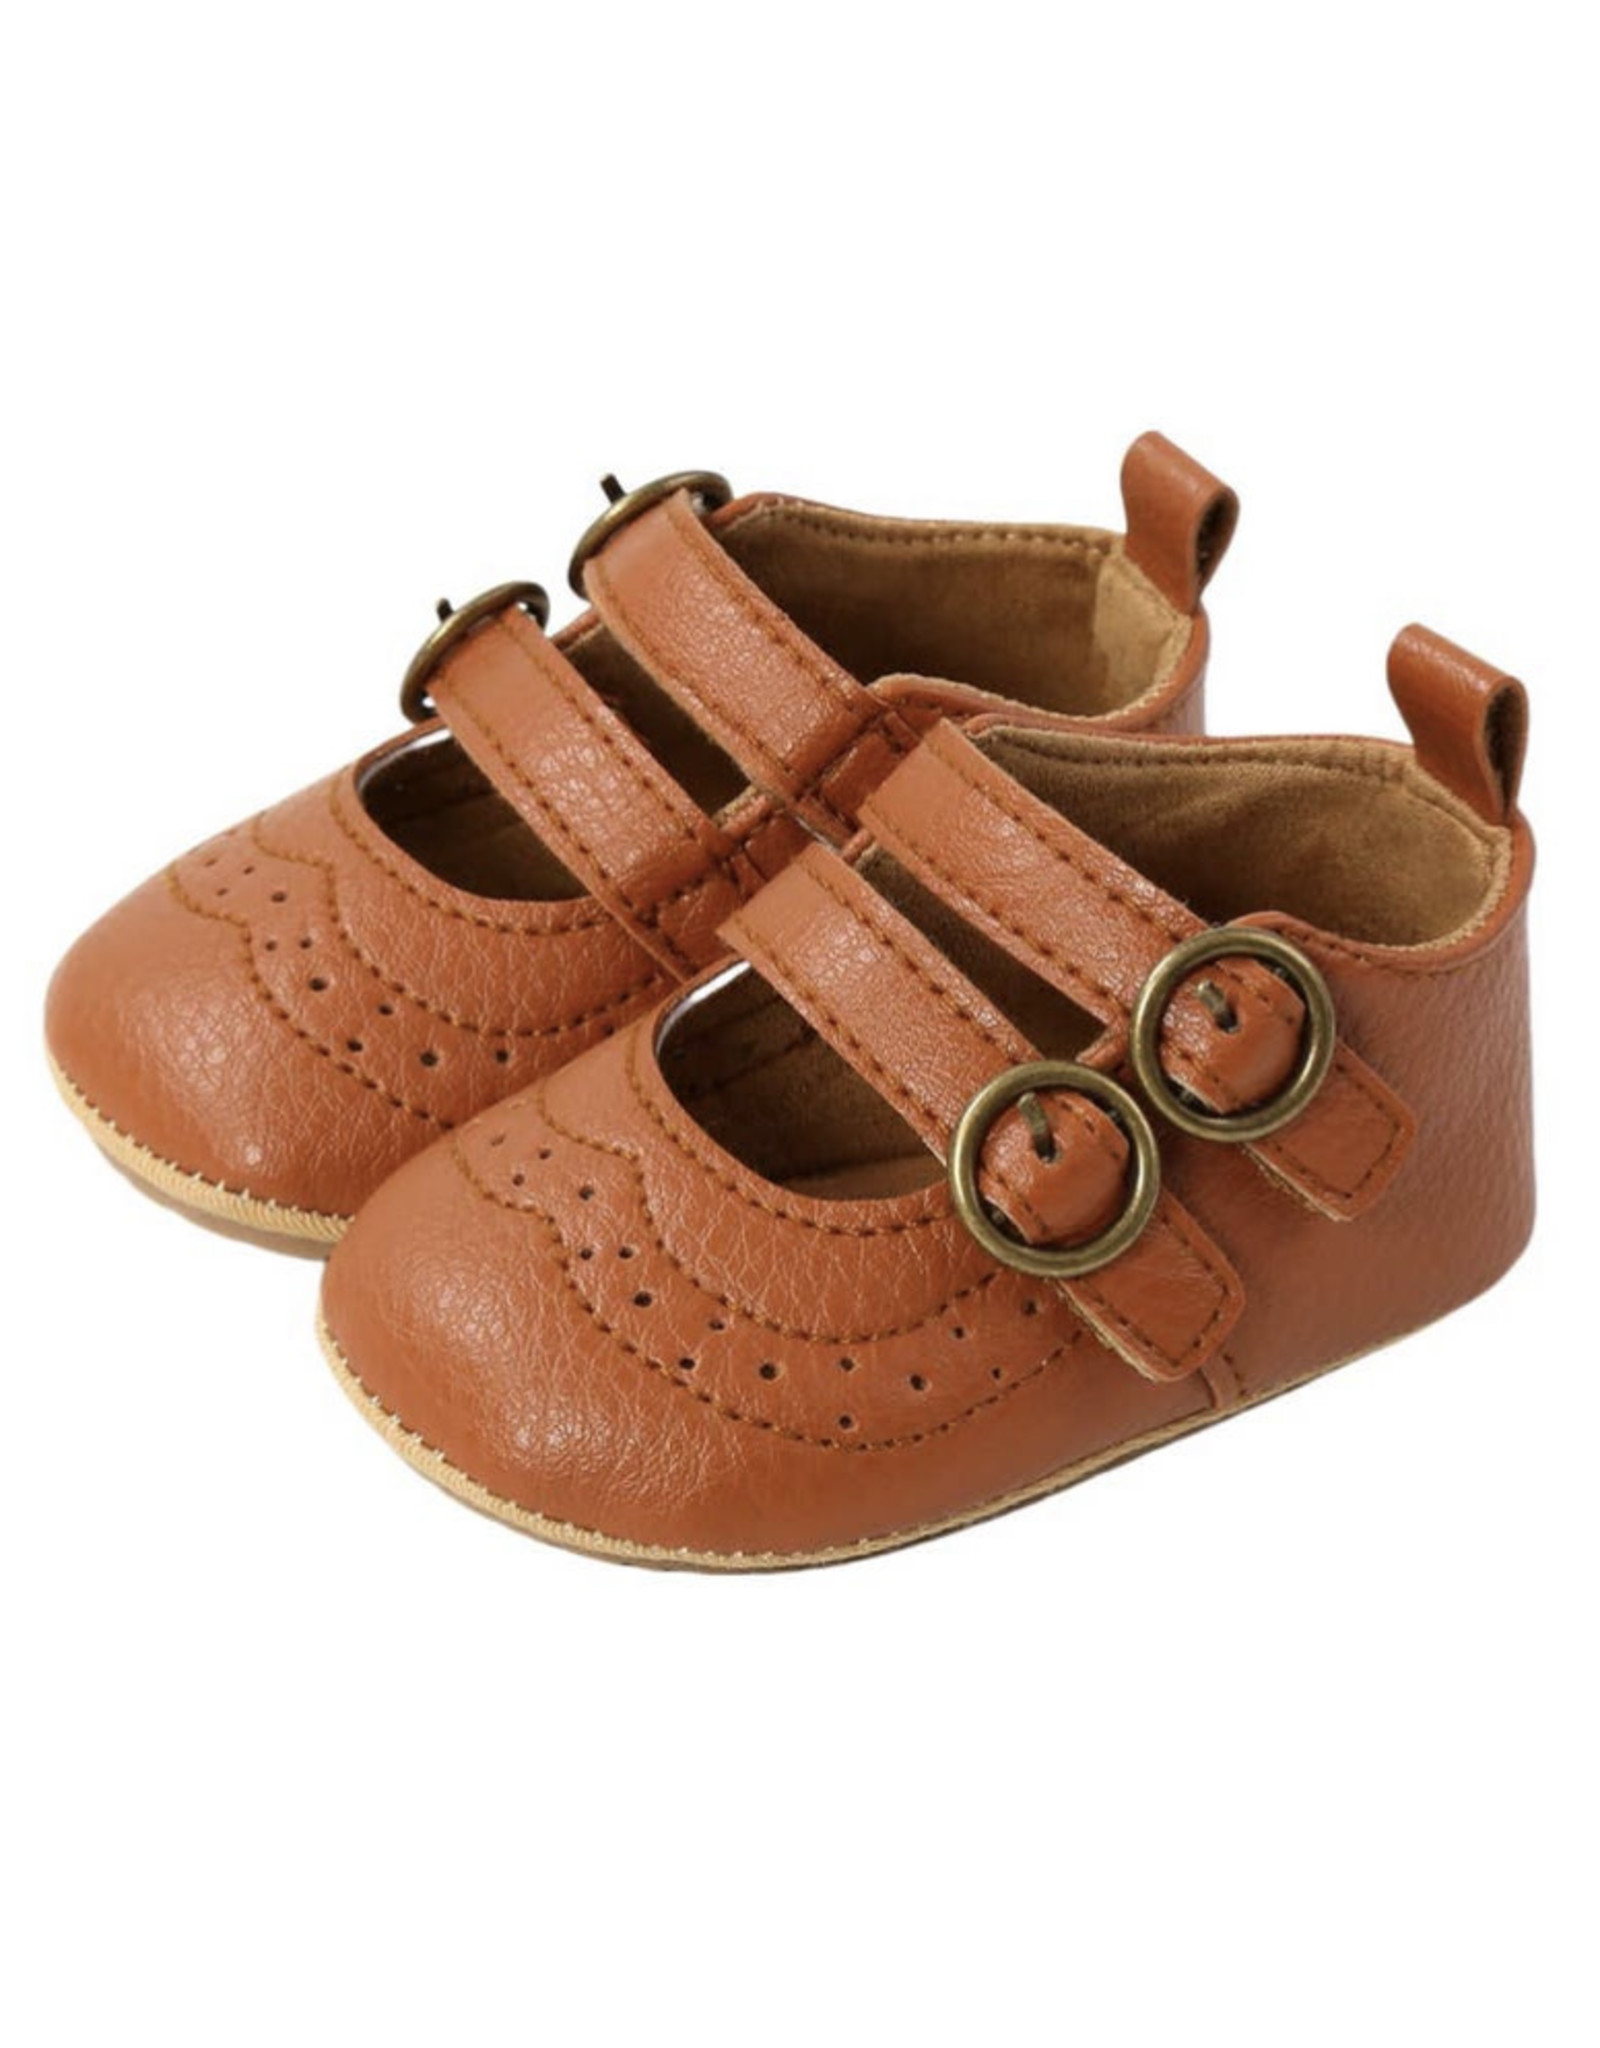 Double Buckle Mary Janes- Tan